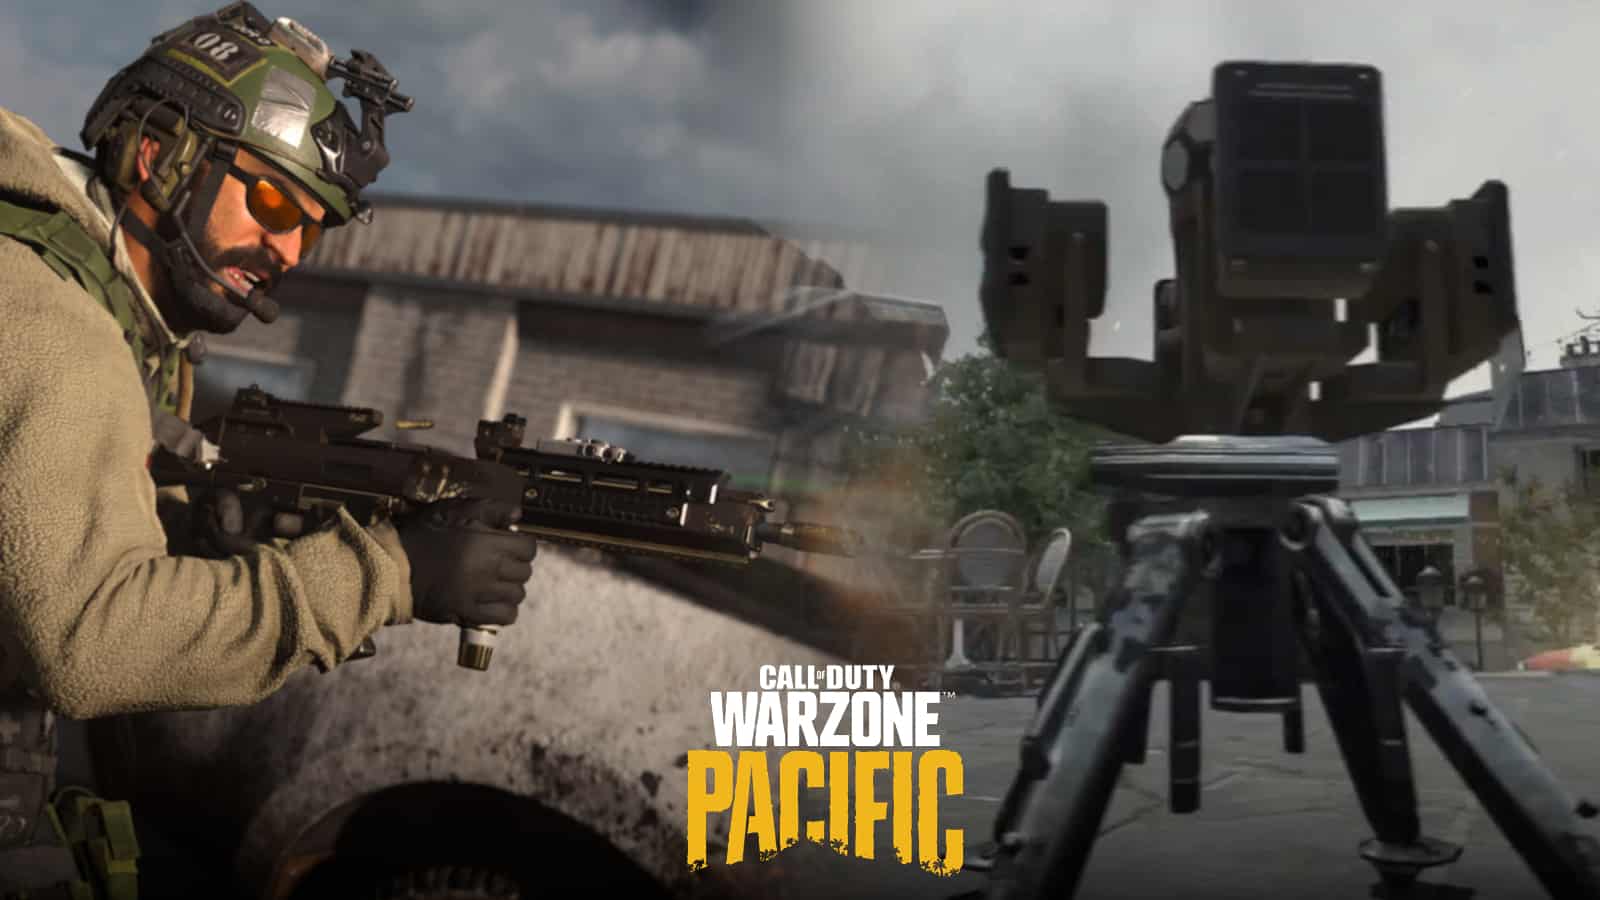 call of duty warzone pacific trophy system